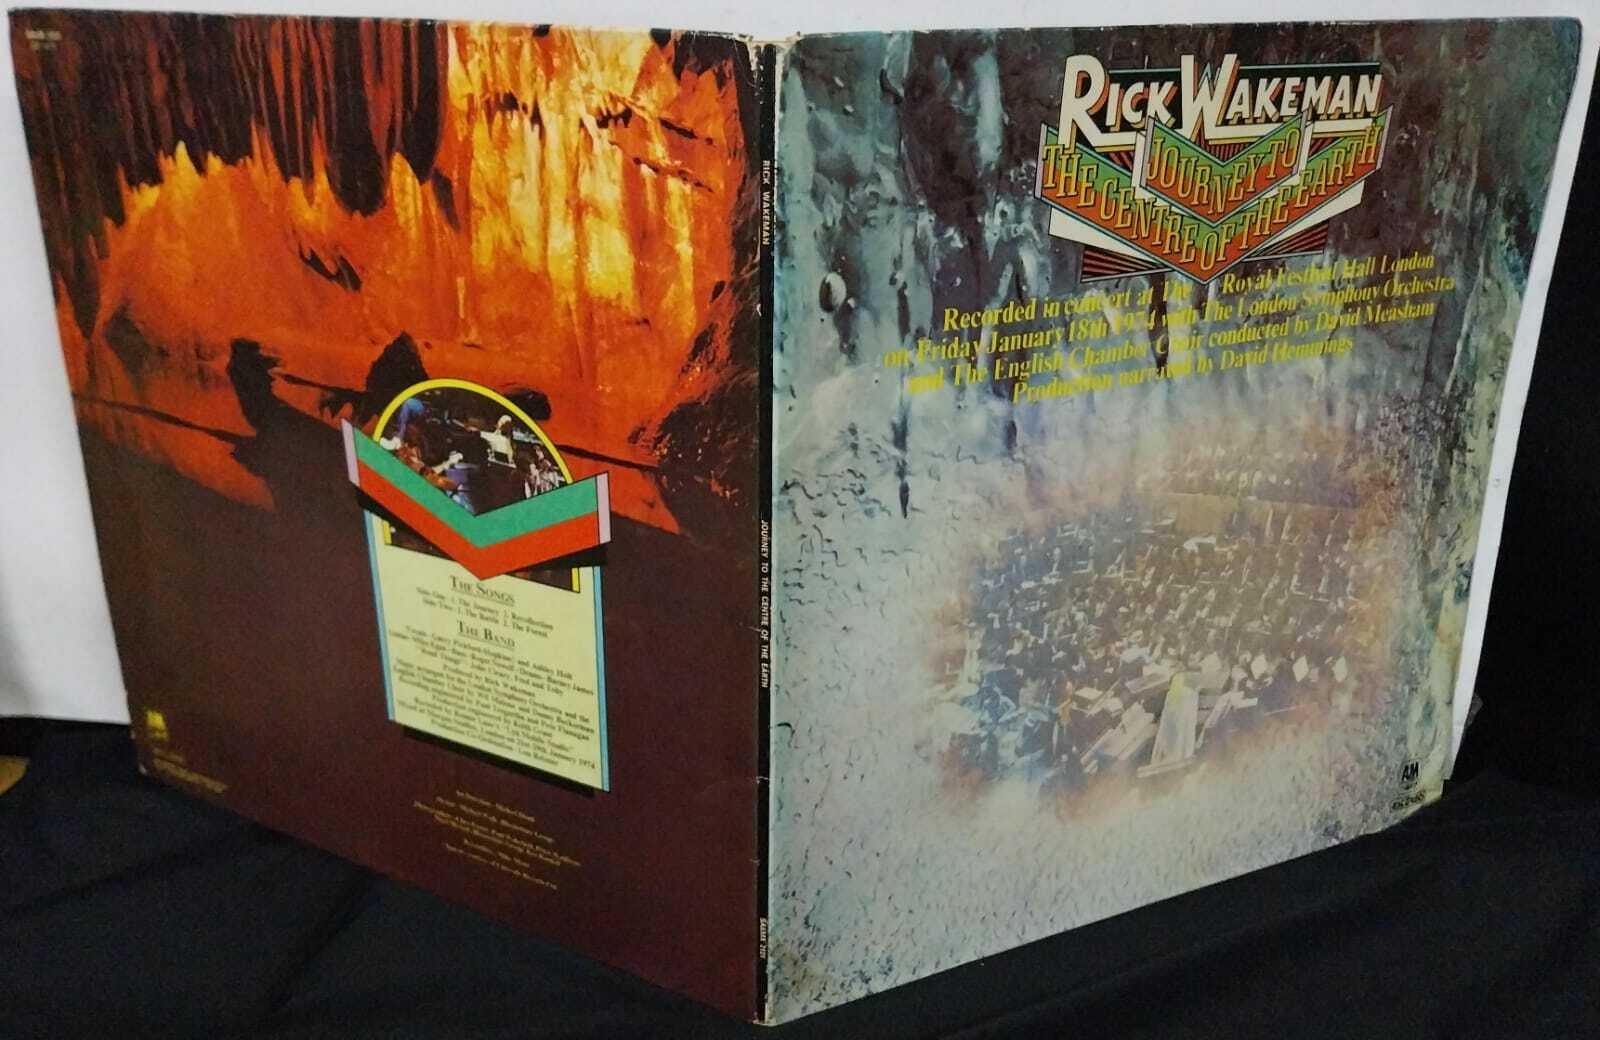 Vinil - Rick Wakeman - Journey to the Centre of the Earth